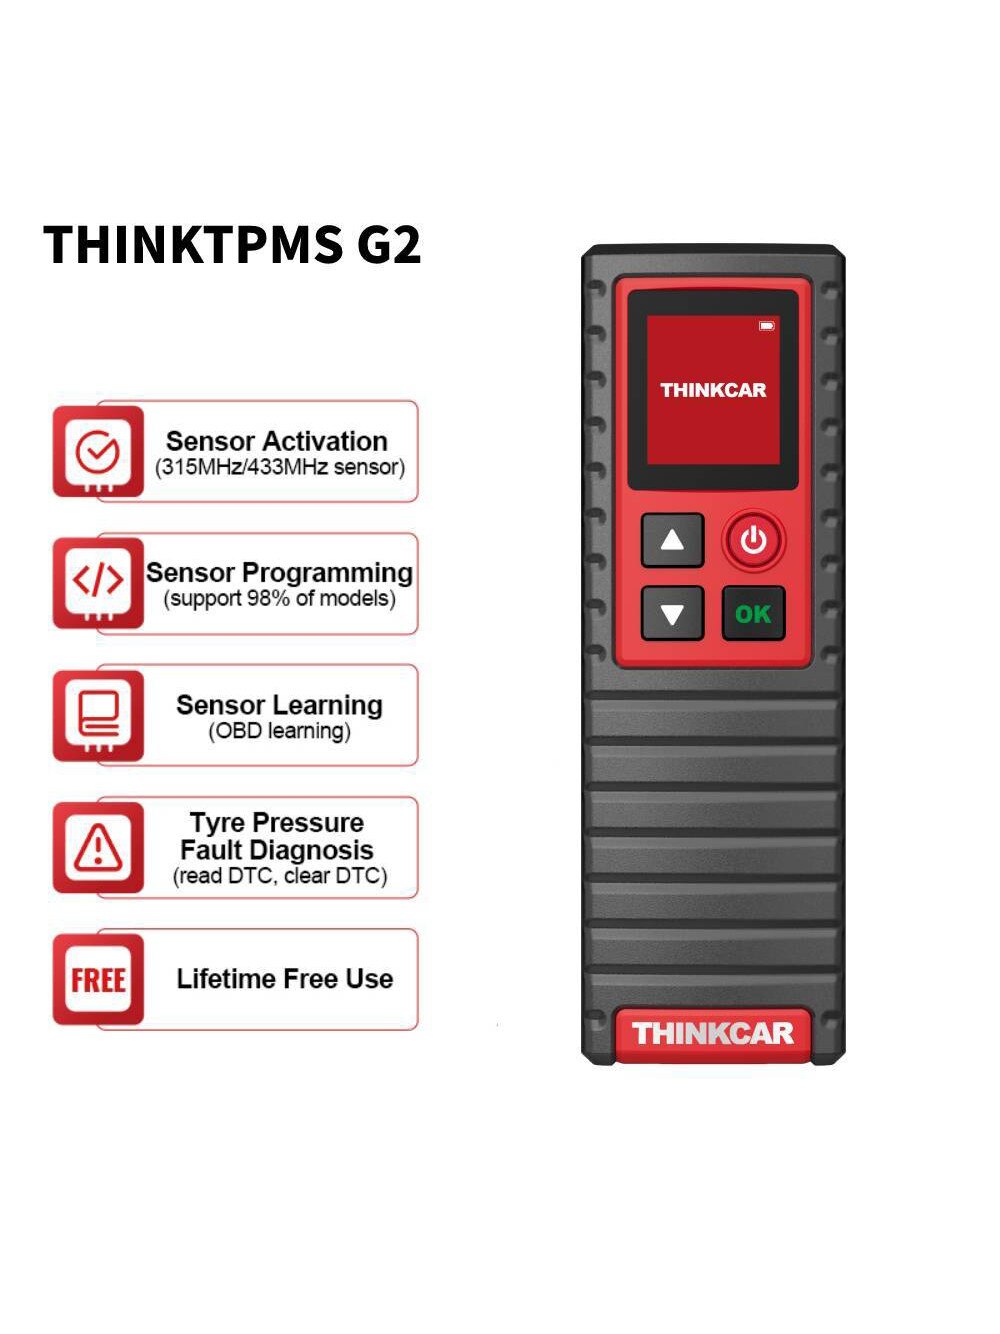 THINKCAR ThinkTool Mini Pro Pros Pros+Functional Modular Thermal Imager Video Scope Worklight Printer TPMS G1 S1 Cable ThinkEasy